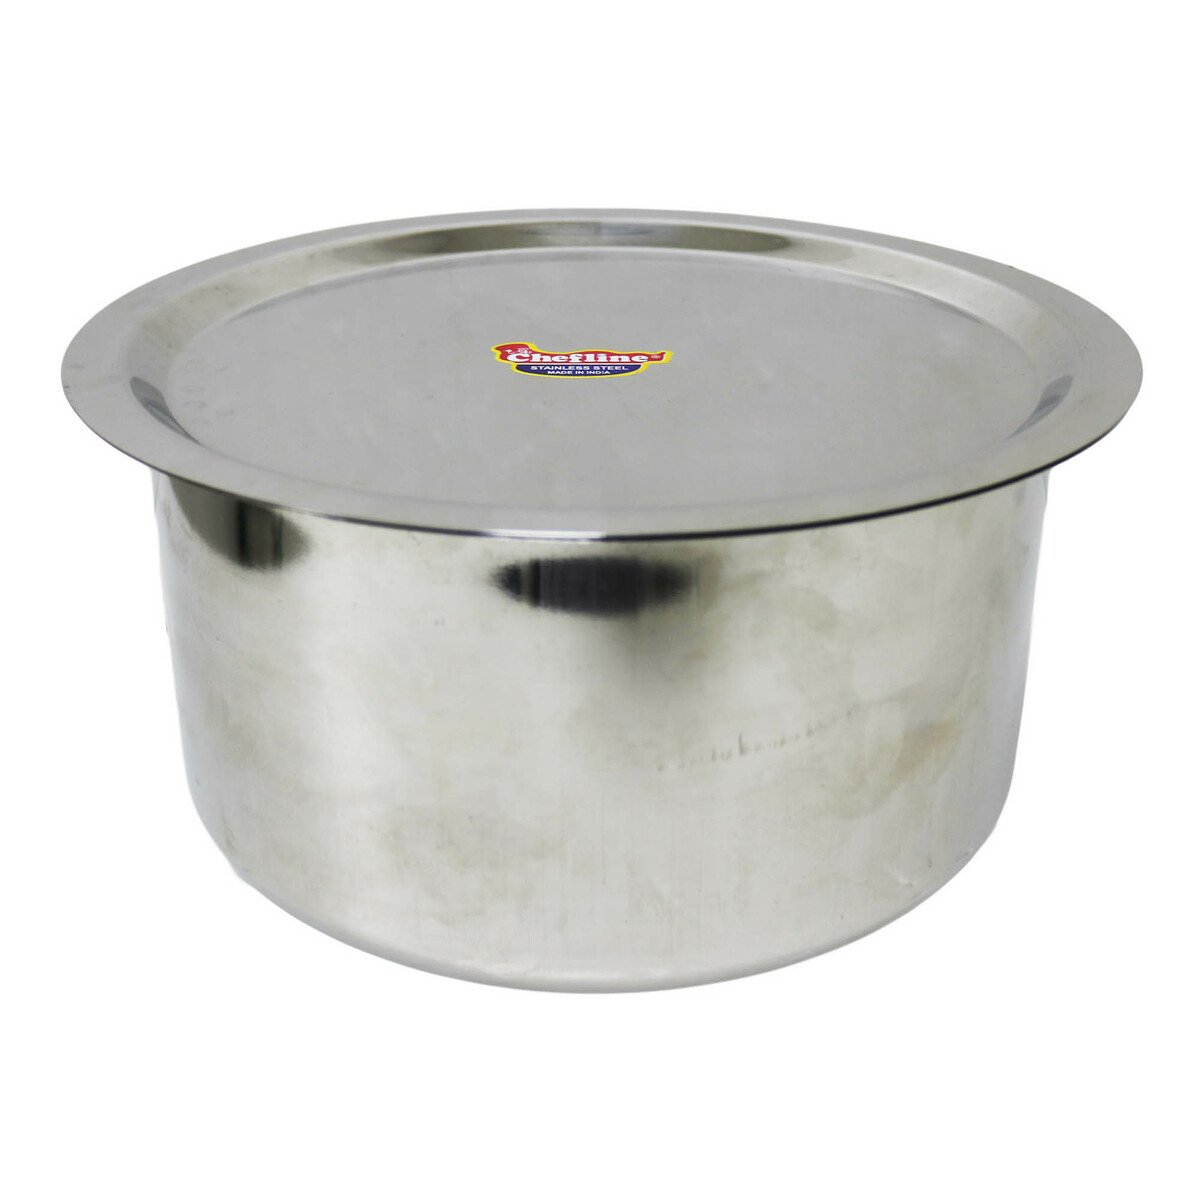 Chefline Top Set Stainless Steel With Lid 18cm